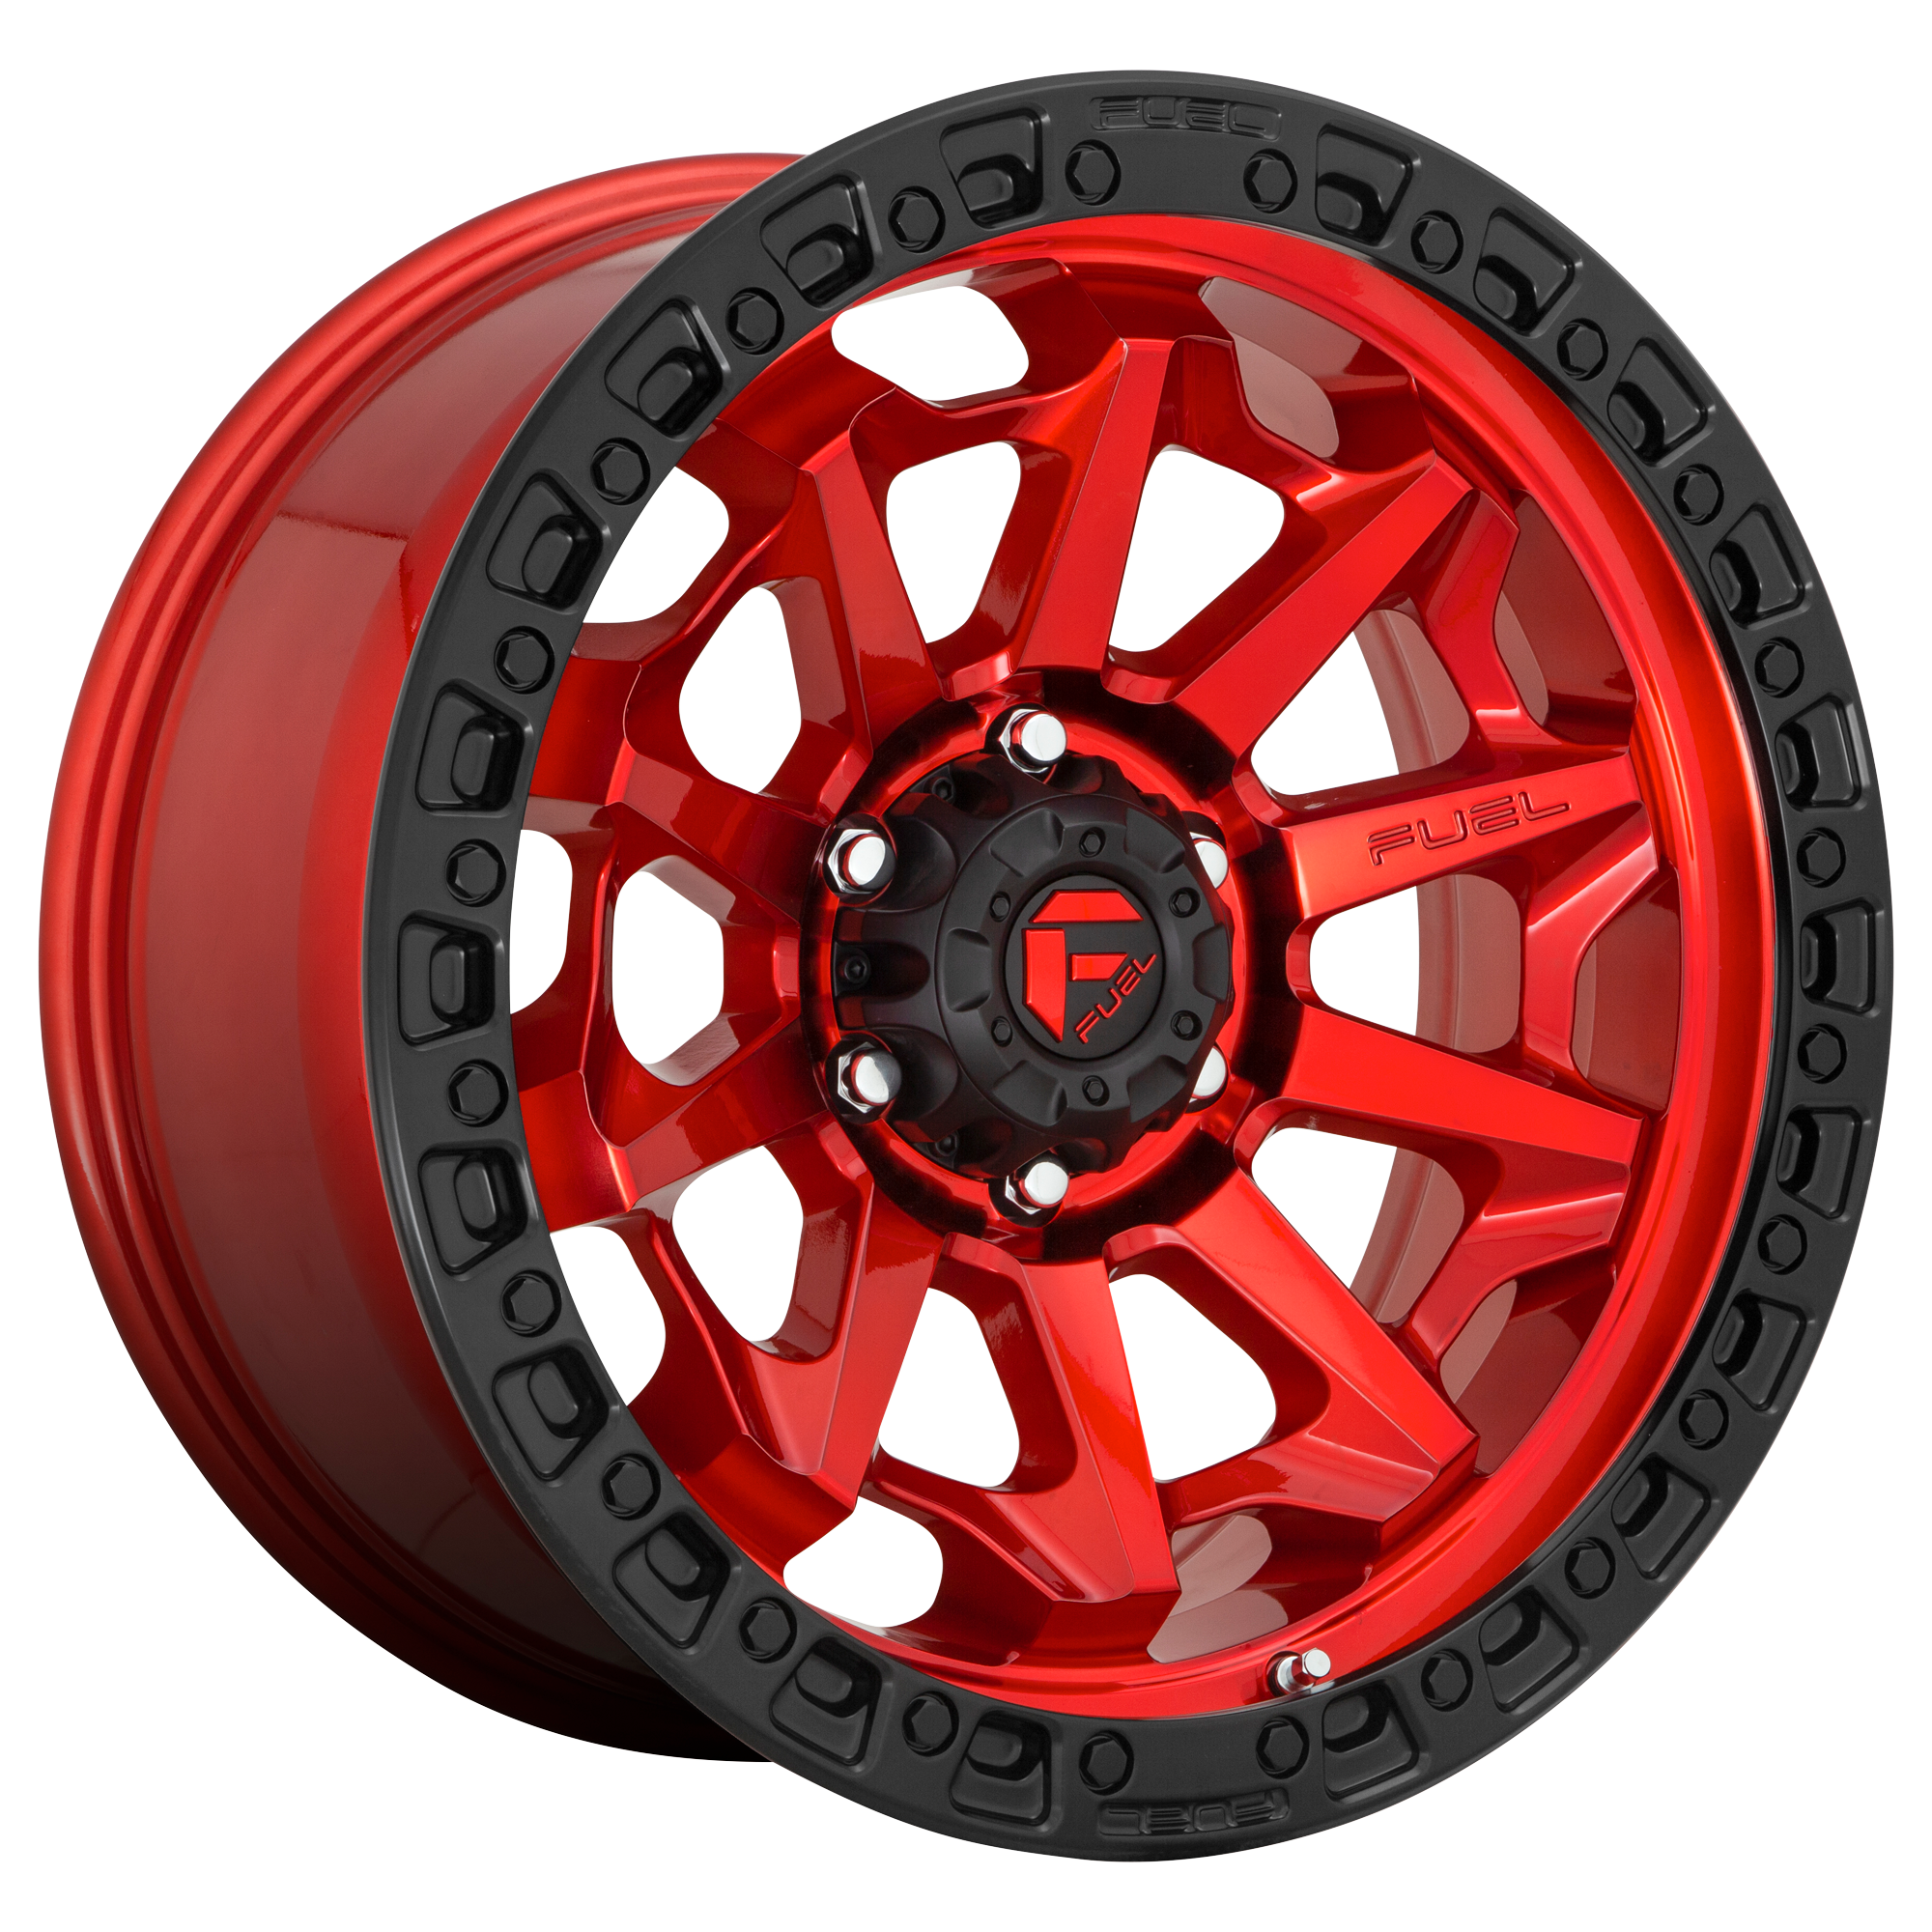 COVERT 20x9 5x127.00 CANDY RED BLACK BEAD RING (1 mm) - Tires and Engine Performance